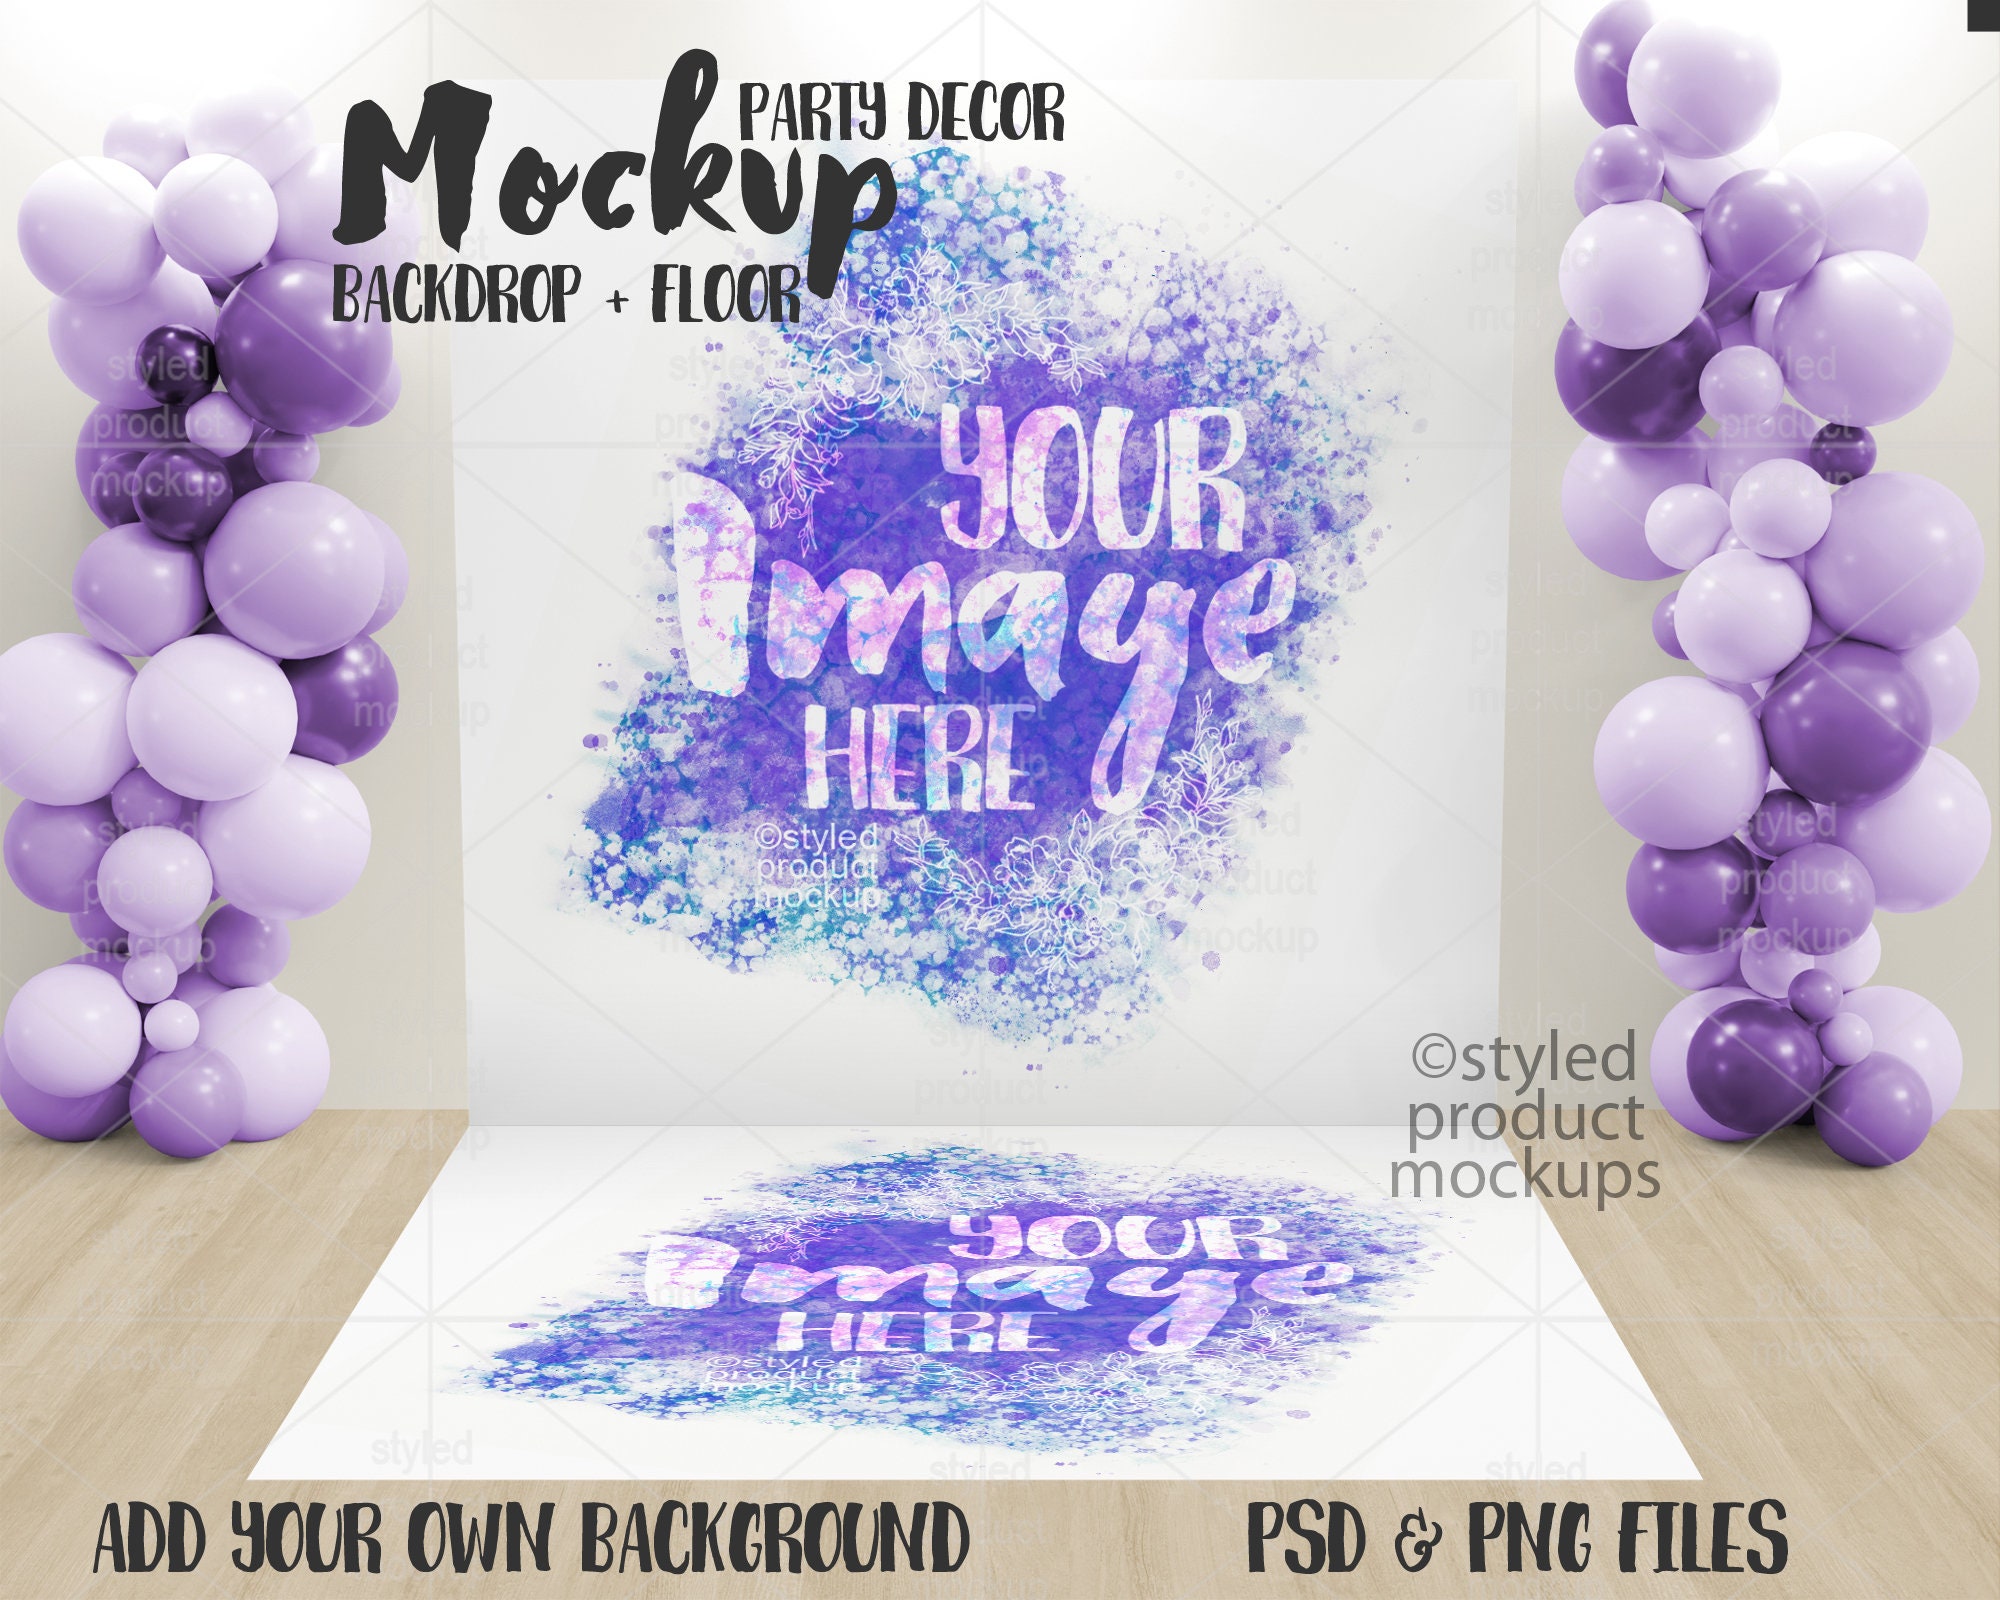 Party Decor Backdrop and Floor Decal Mockup Add Your Own Image 